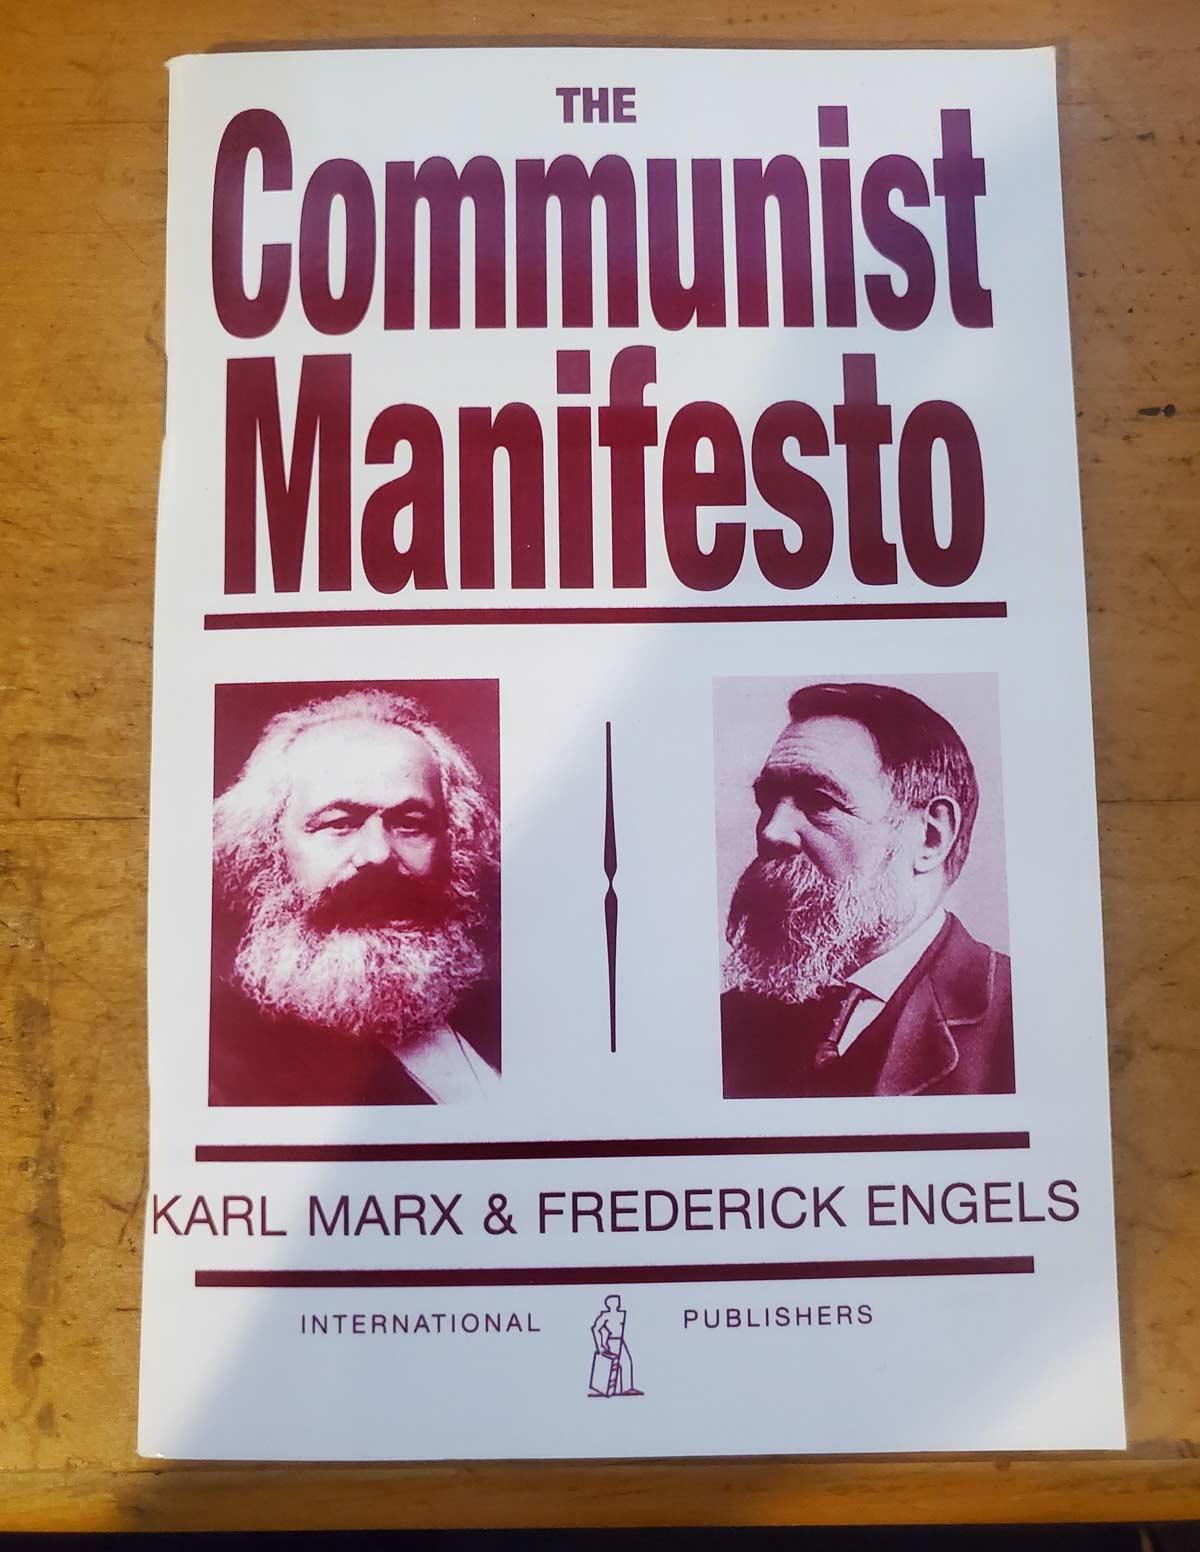 My mom got me the Communist Manifesto as a stocking stuffer for Christmas